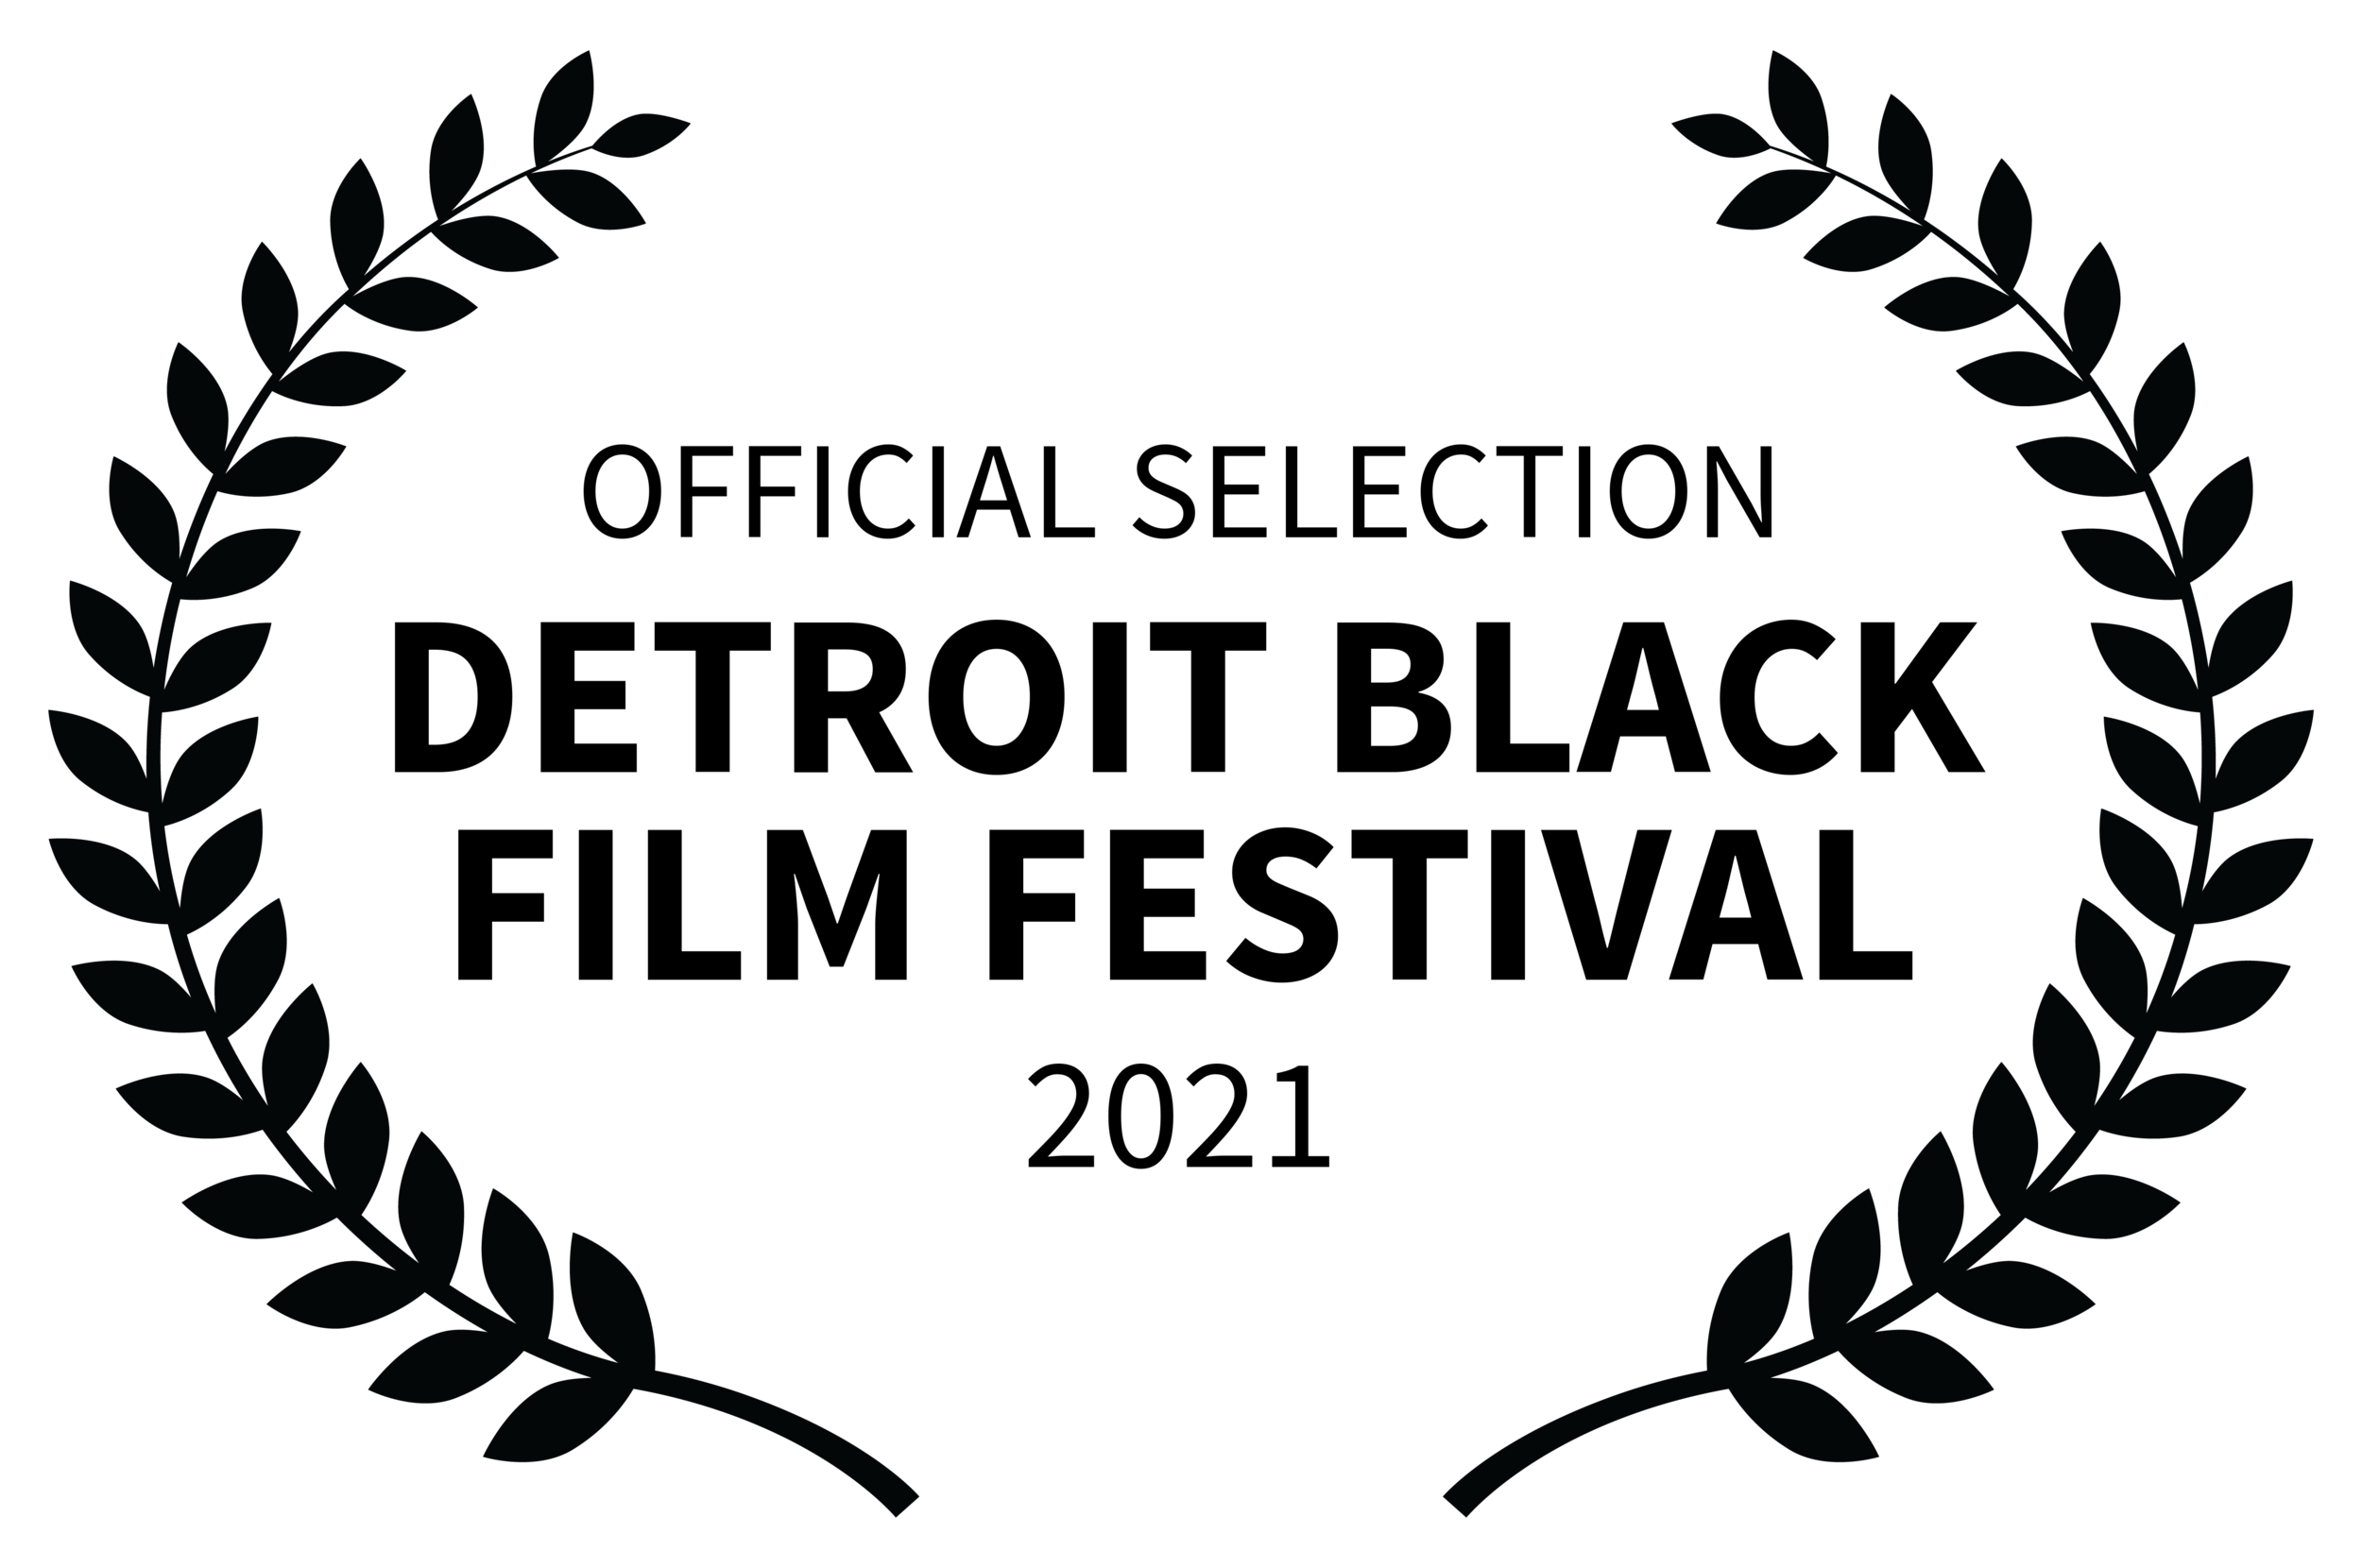 OFFICIALSELECTION-DETROITBLACKFILMFESTIVAL-2021.png